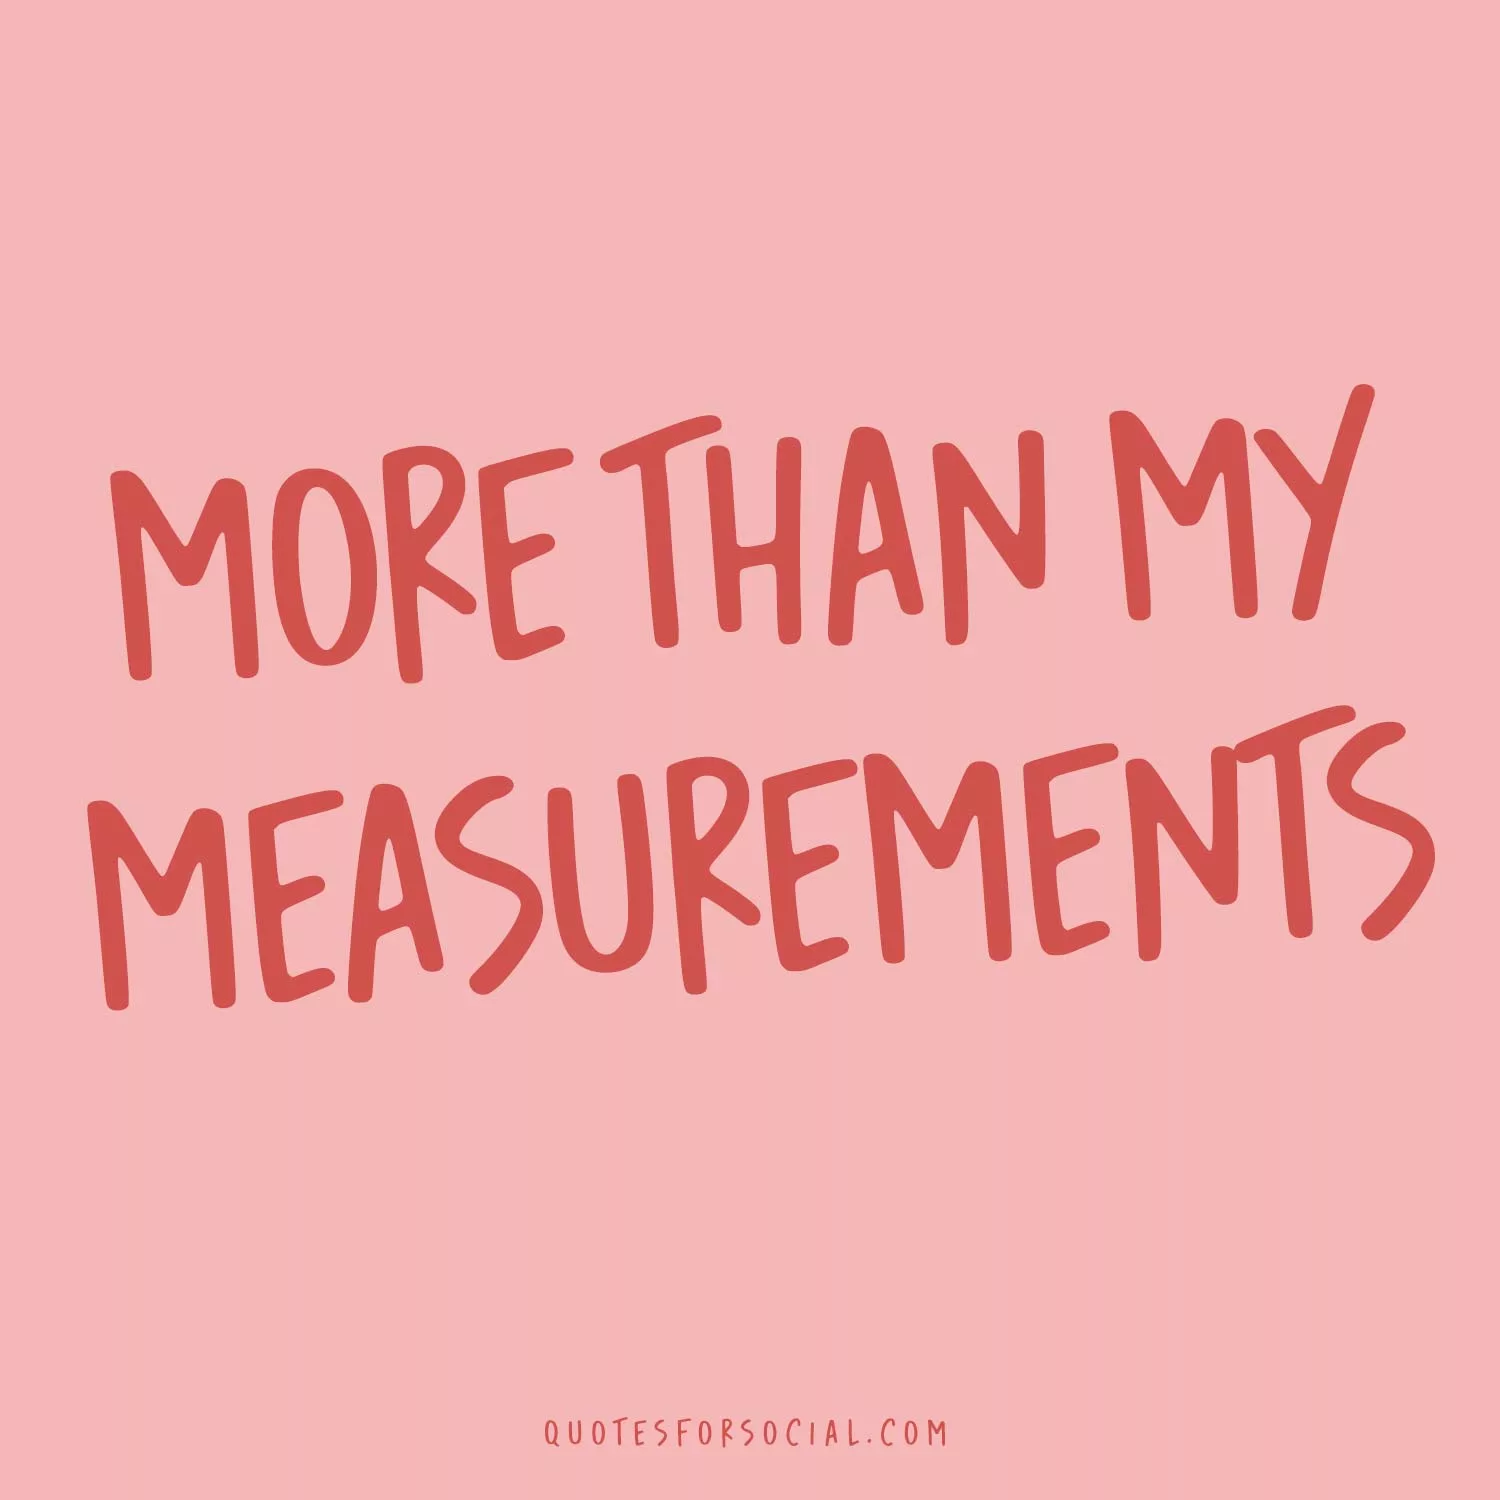 More than my measurements. Thick girl quotes for Instagram cover image